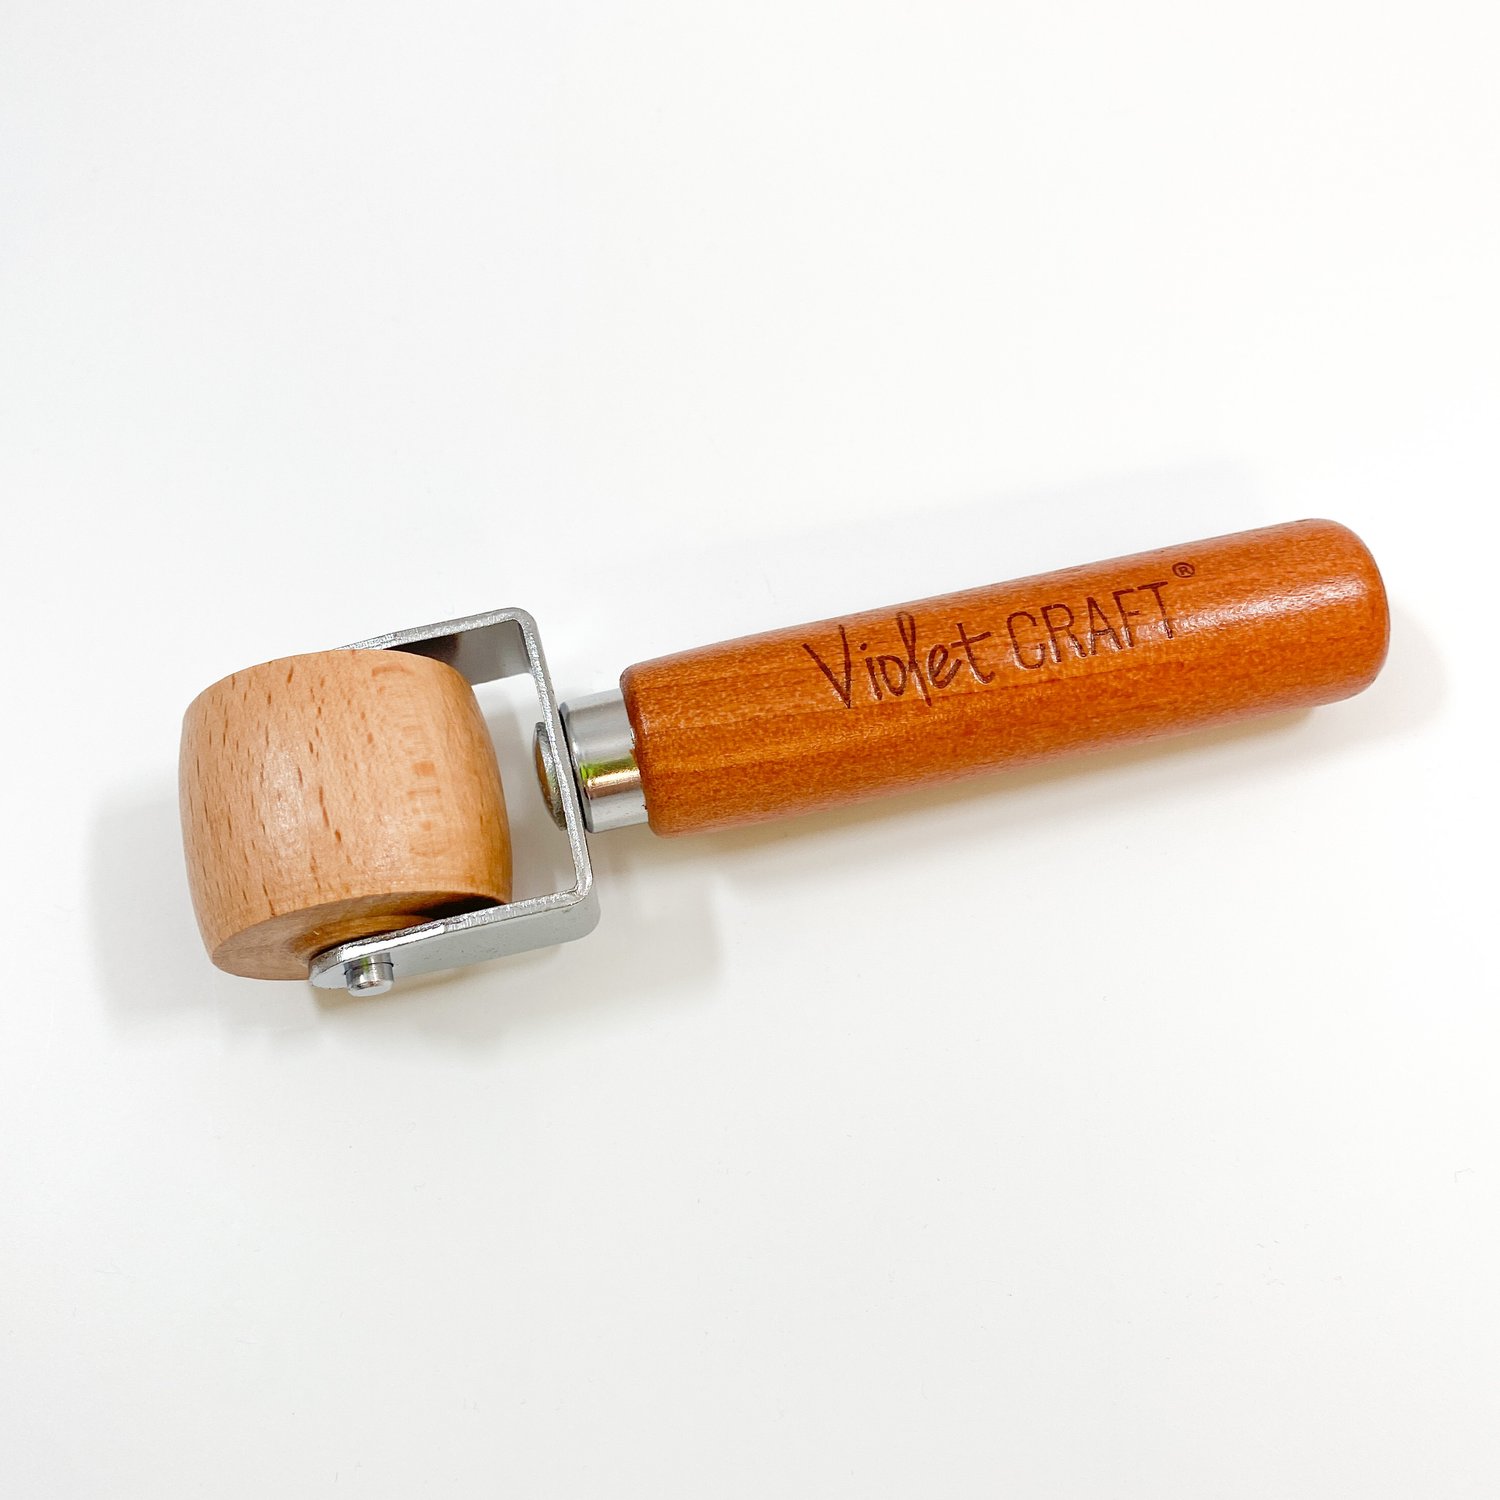 Sewing Seam Roller, Wooden Seam Roller Tool For Sewing, Platen Tools,  Leather Press Edge Roller Leather Edge Creaser And Smoother, For Handmade  Hobby Beginners: Buy Online at Best Price in UAE 